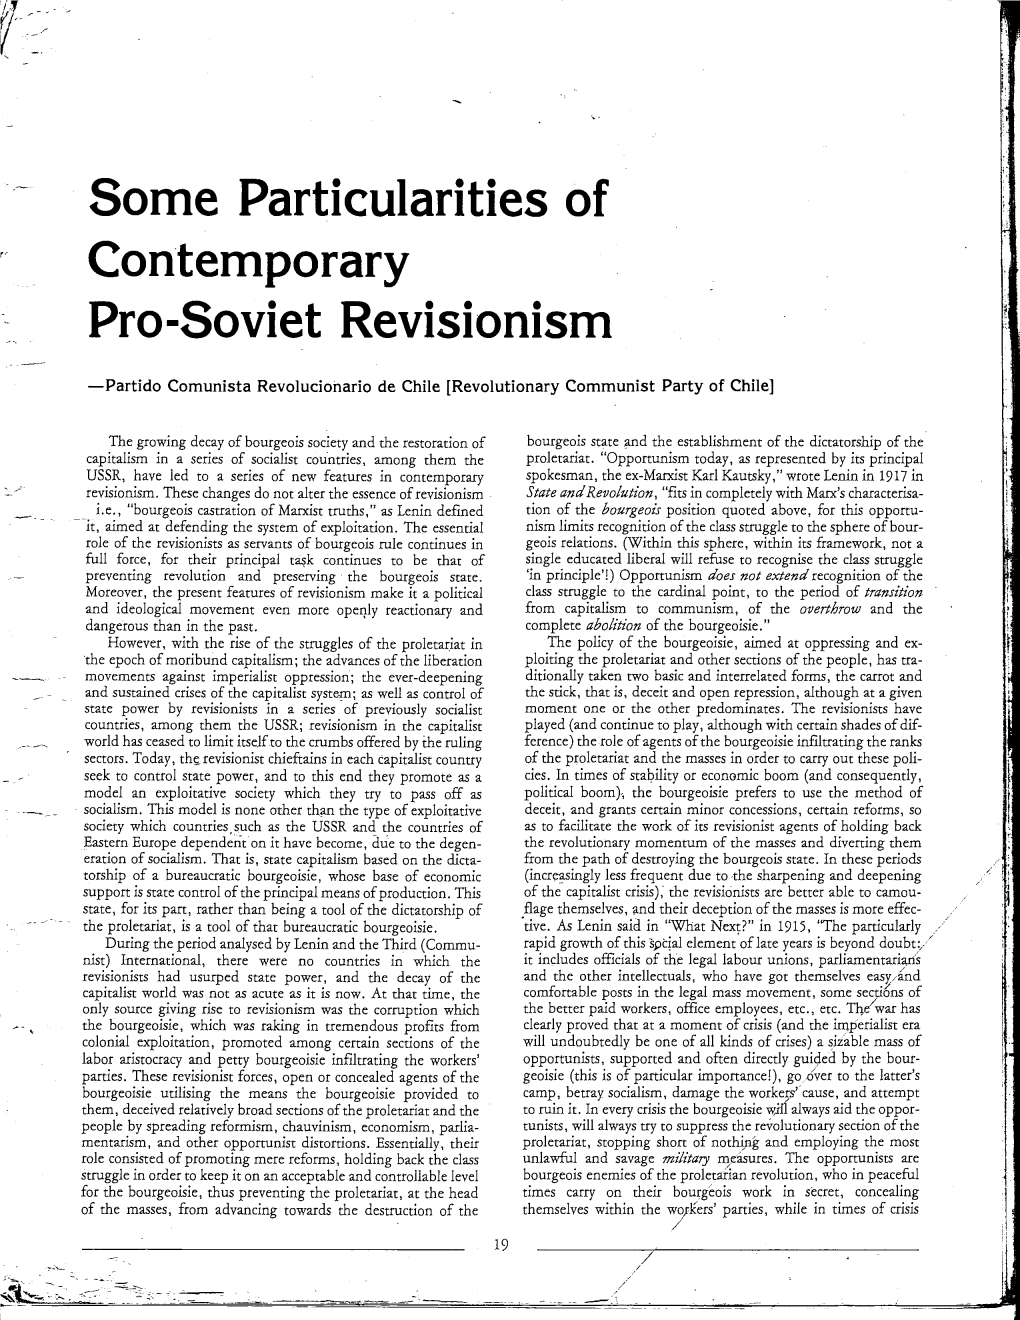 Some Particularities of Contemporary Pro-Soviet Revisionism